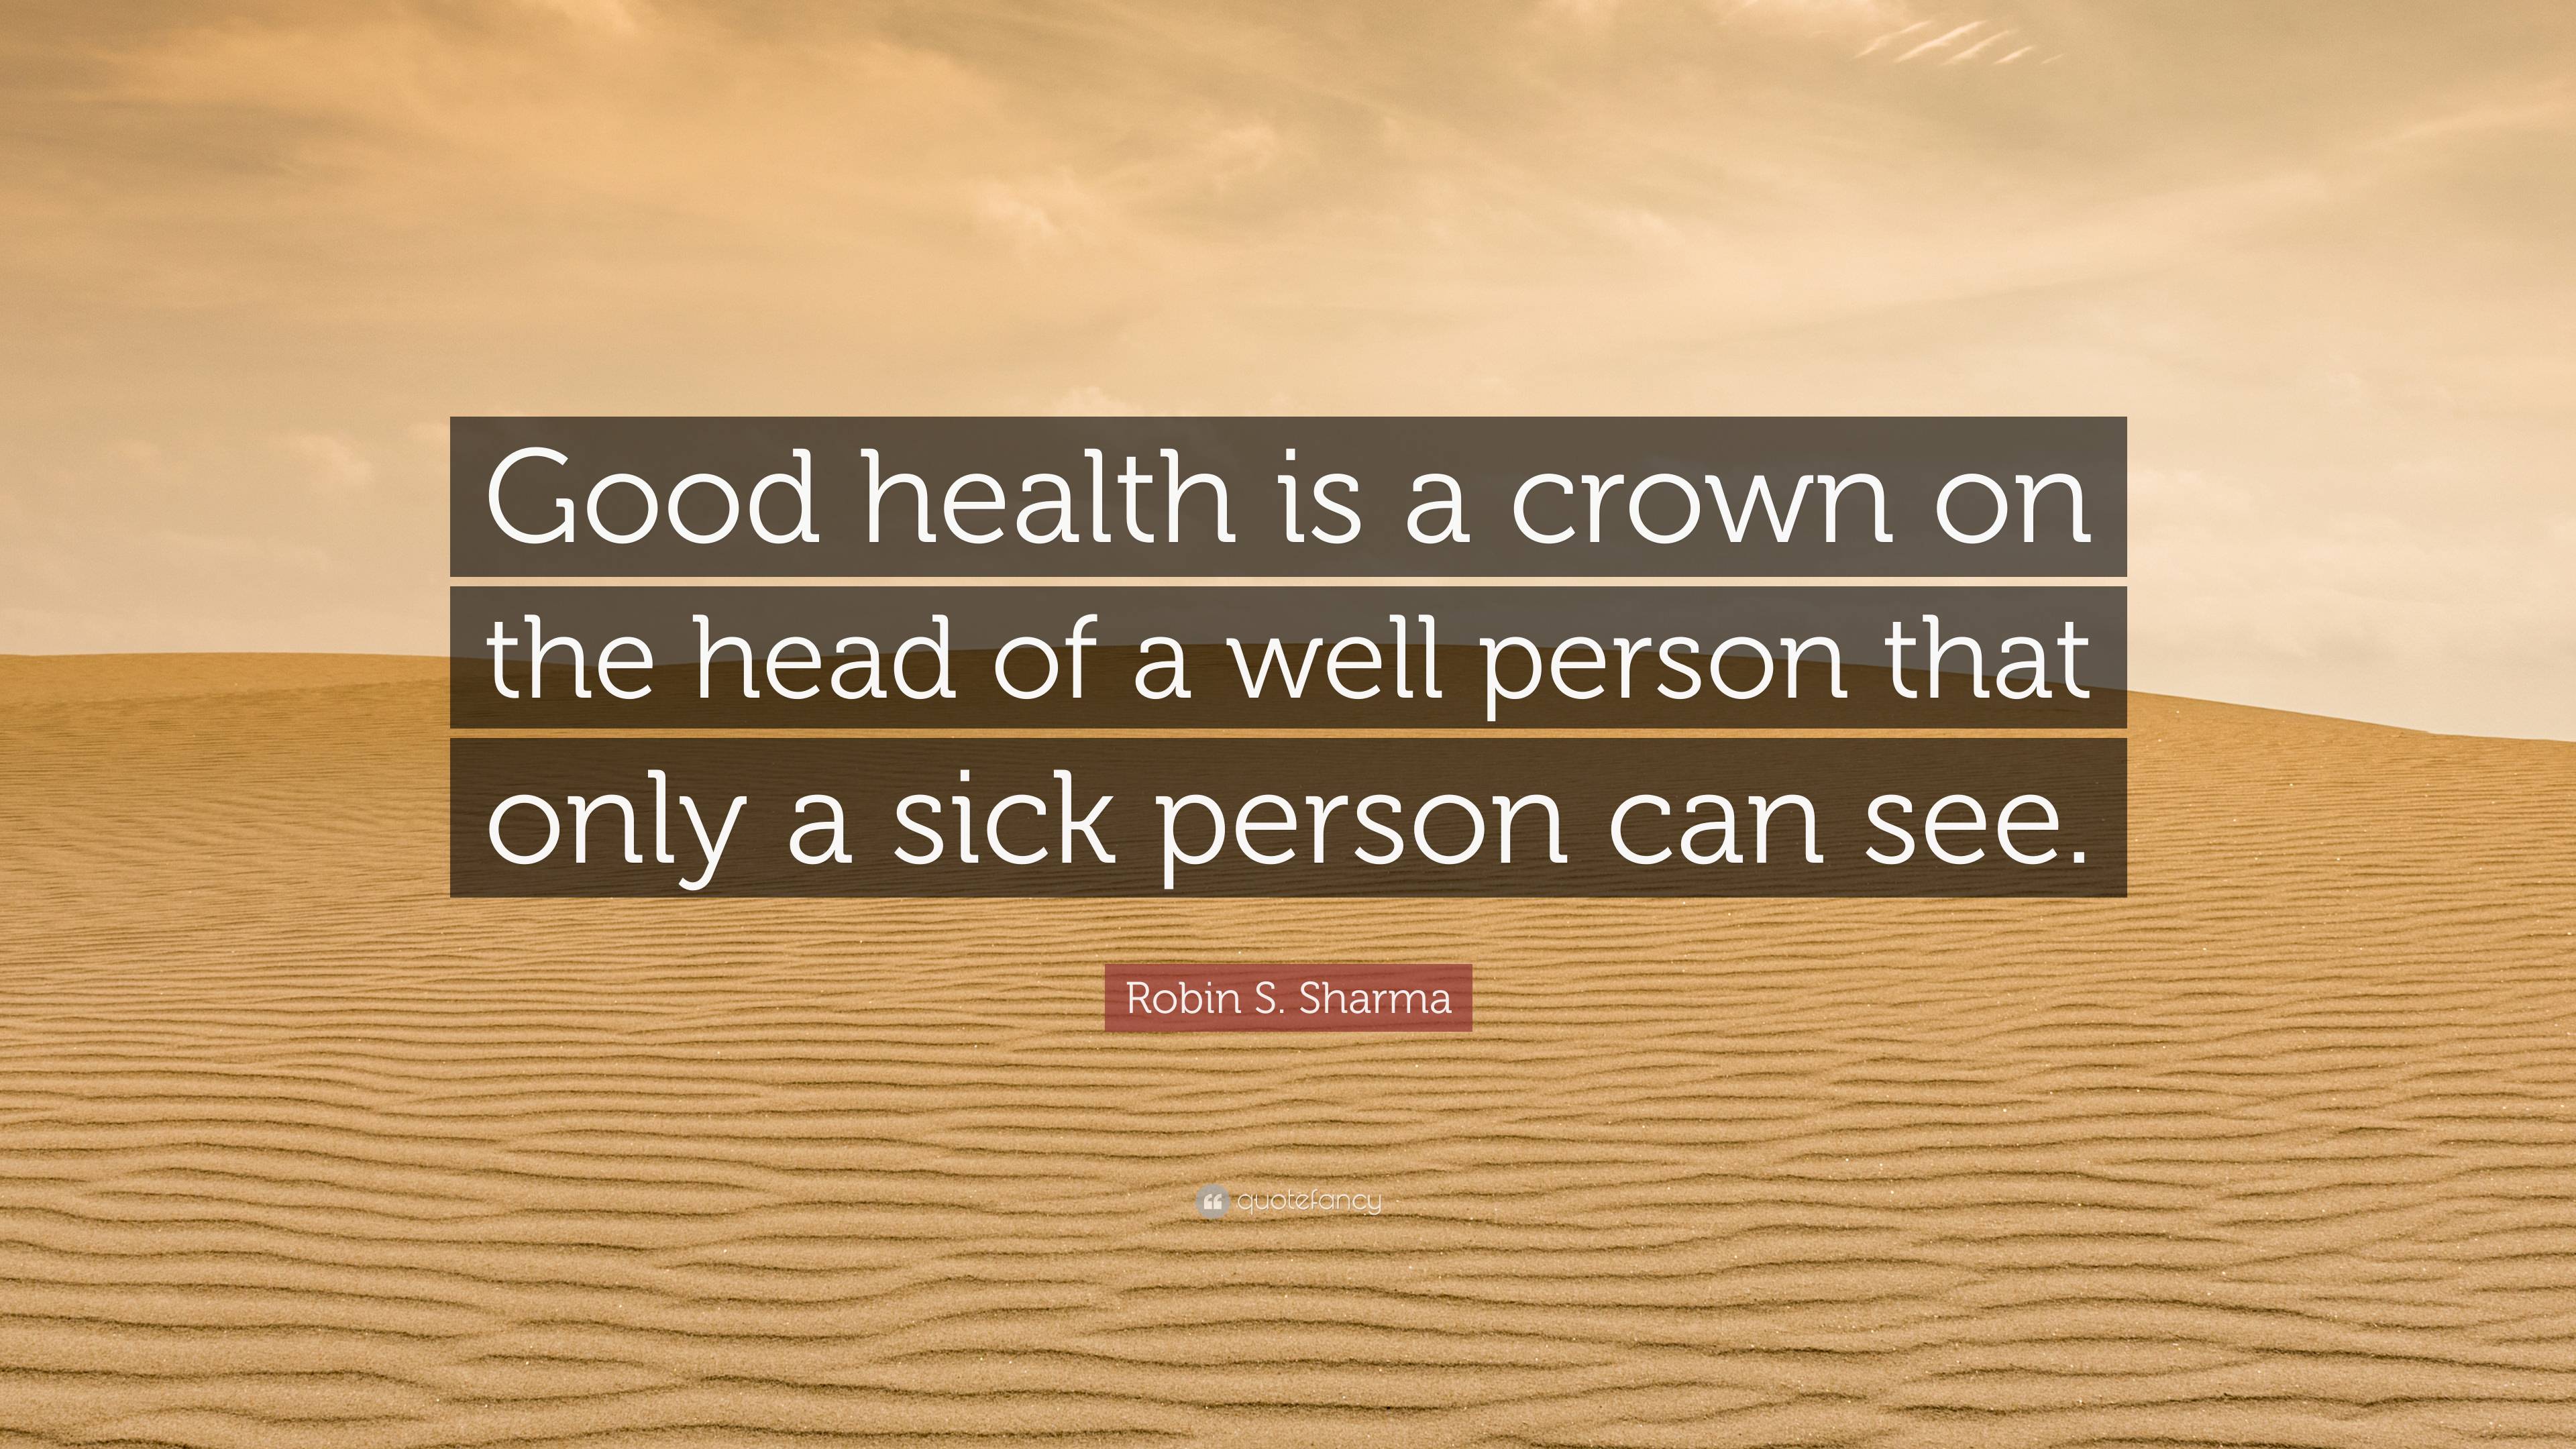 Robin S Sharma Quote Good Health Is A Crown On The Head Of A Well